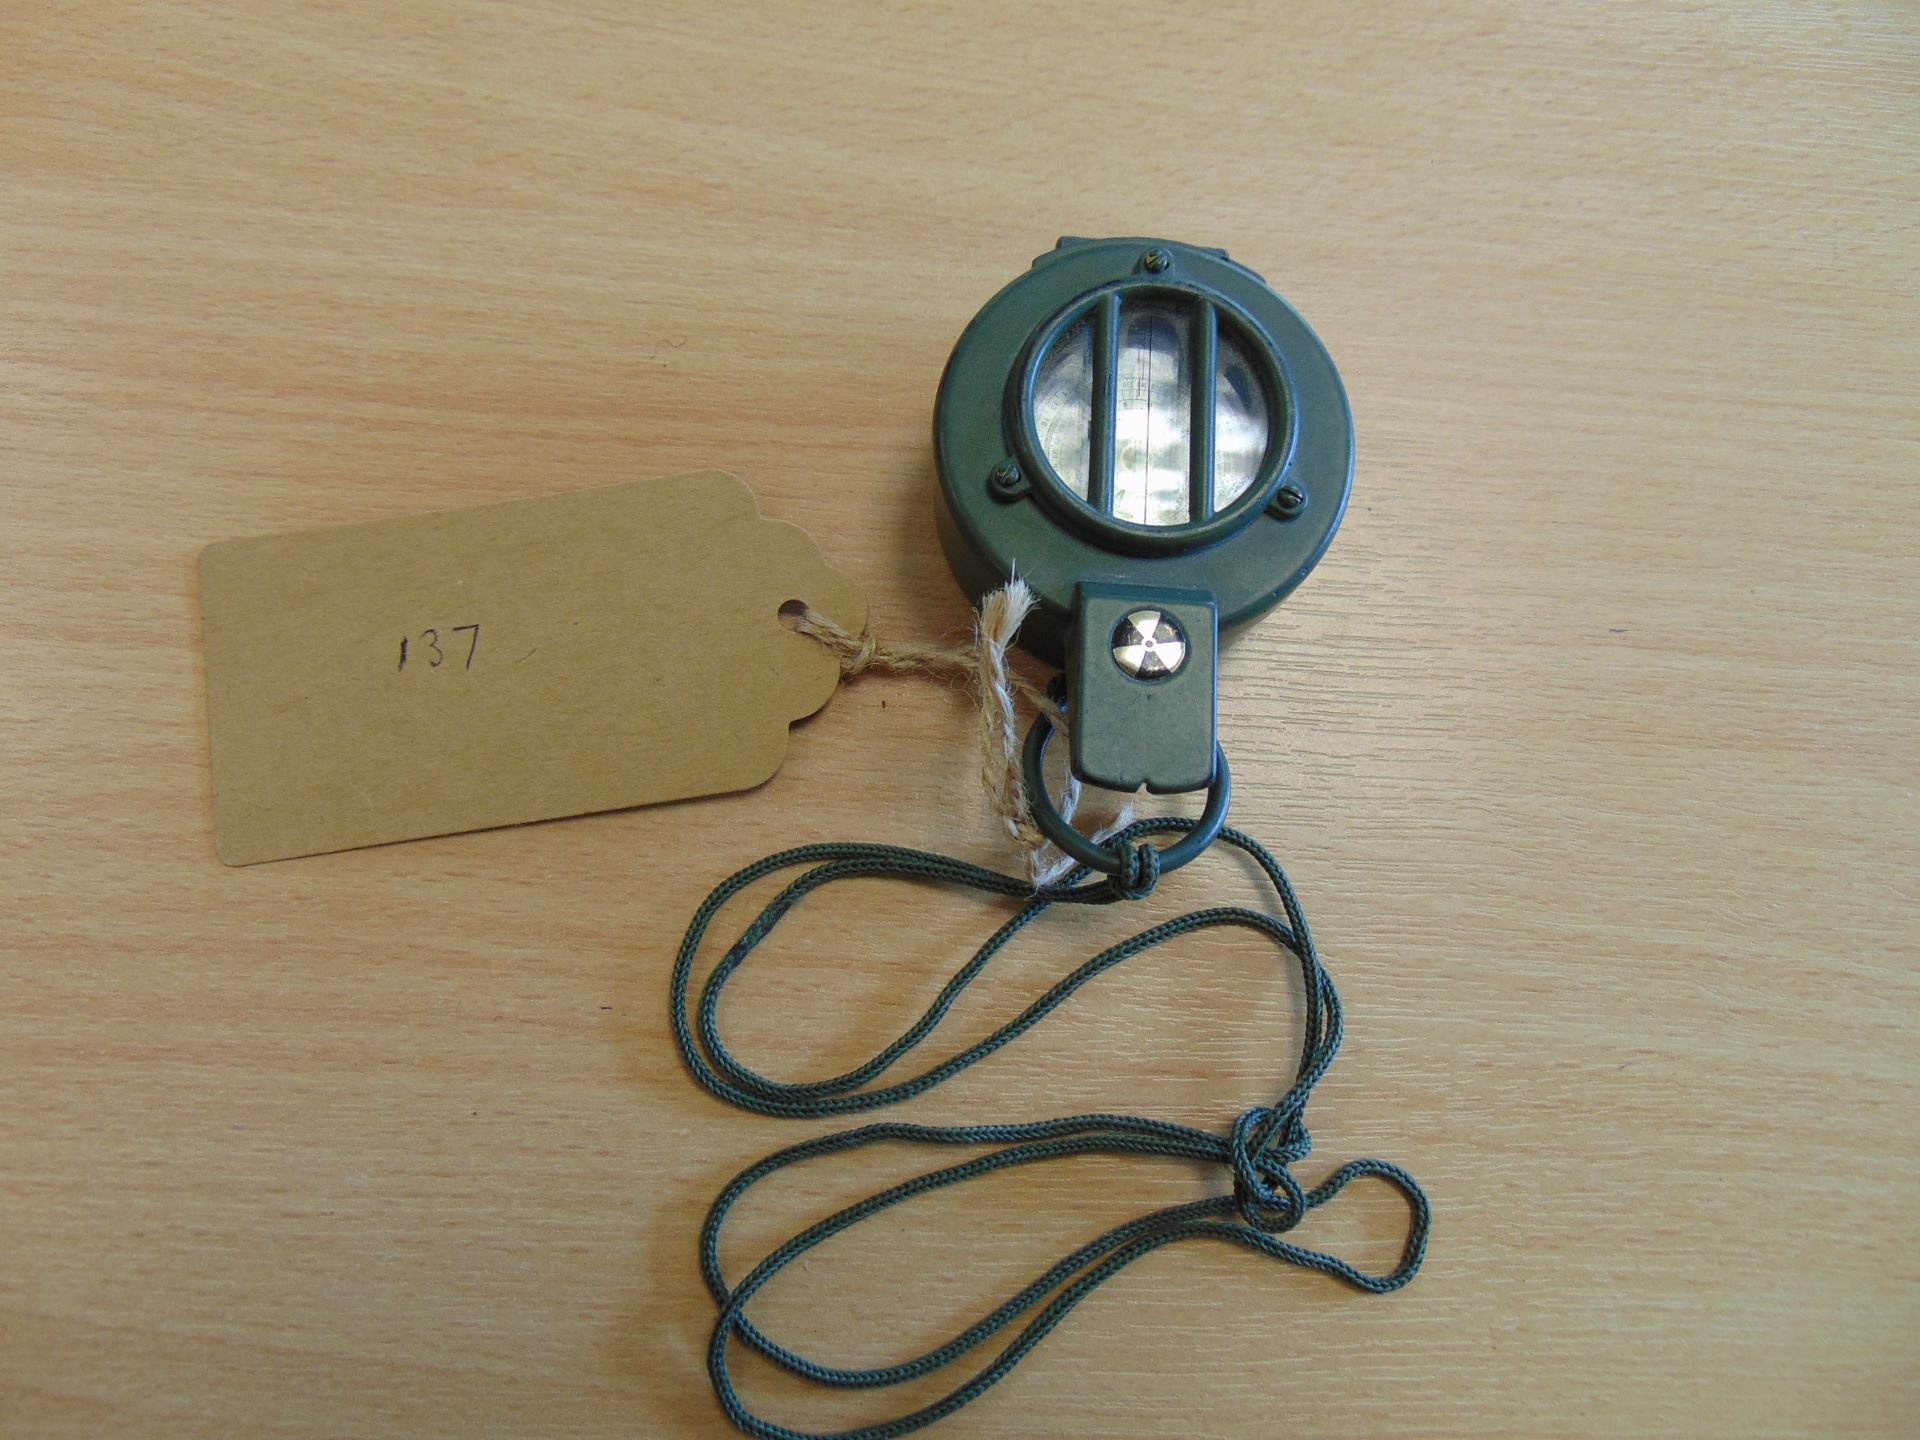 Francis Barker British Army M88 Prismatic Compass in Mils - Image 4 of 4